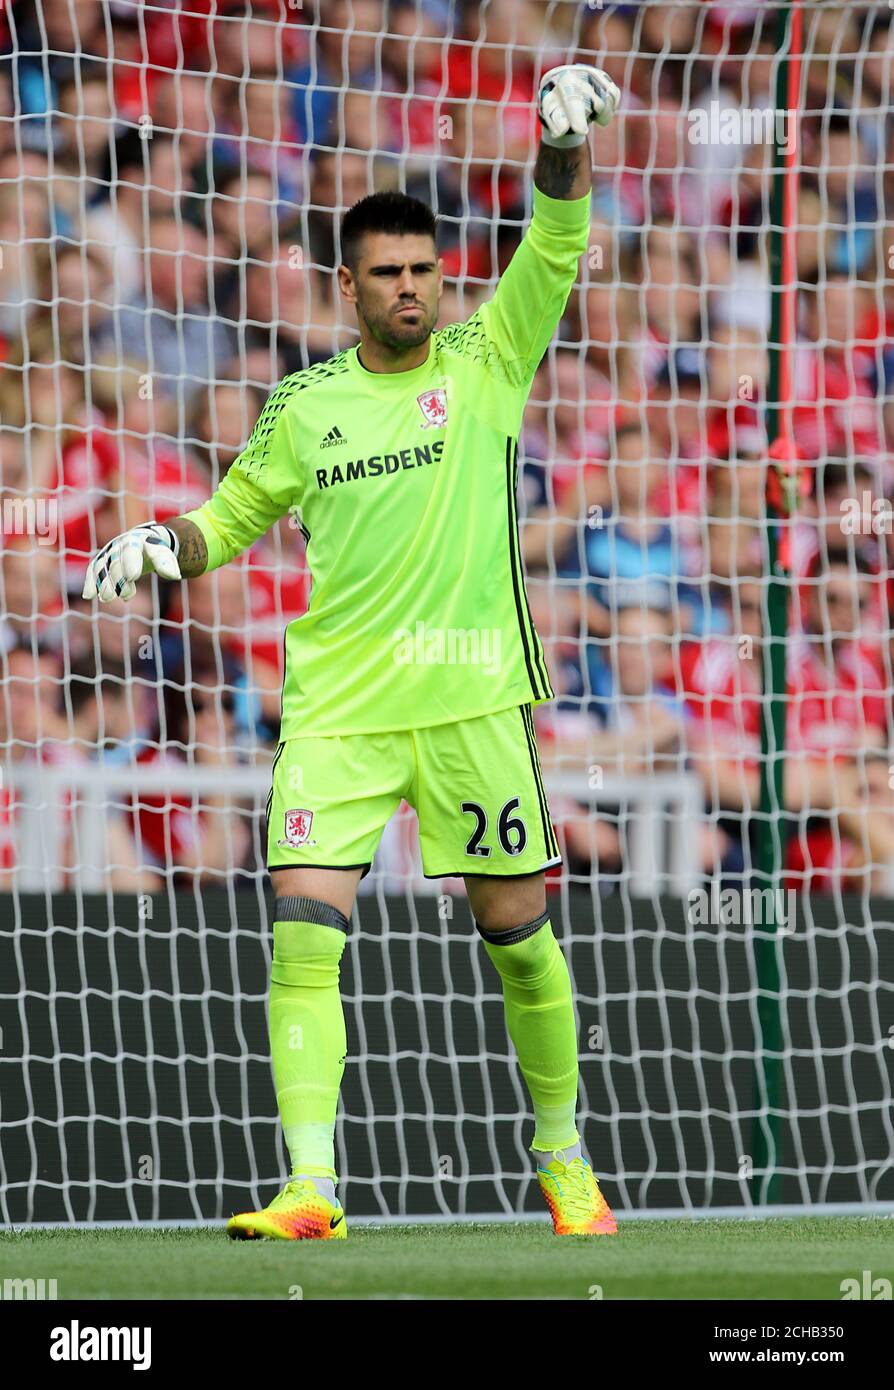 Middlesbrough Goalkeeper Victor Valdes during the Premier League match at the Riverside Stadium, Middlesbrough. PRESS ASSOCIATION Photo. Picture date: Saturday August 13, 2016. See PA story SOCCER Middlesbrough. Photo credit should read: Richard Sellers/PA Wire. RESTRICTIONS: EDITORIAL USE ONLY No use with unauthorised audio, video, data, fixture lists, club/league logos or 'live' services. Online in-match use limited to 75 images, no video emulation. No use in betting, games or single club/league/player publications.- Se Stock Photo